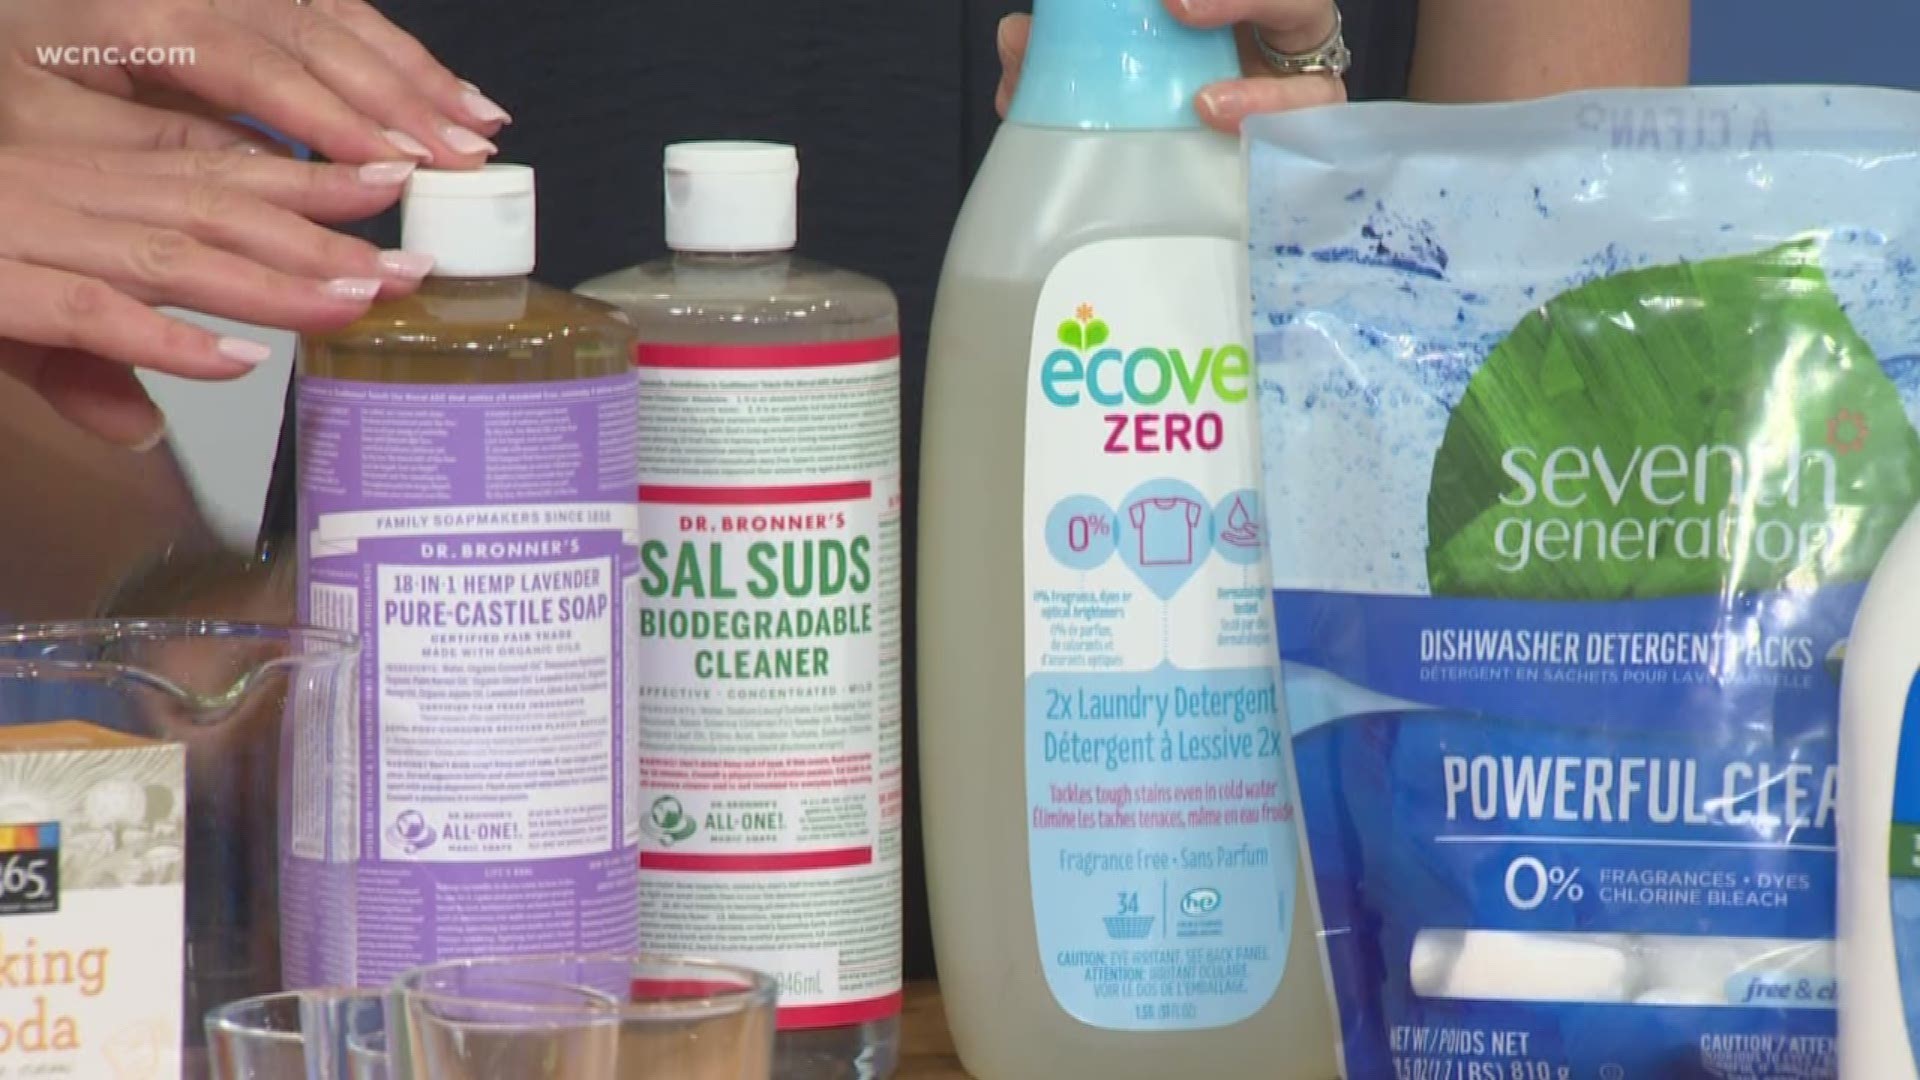 Traditional cleaning products are filled with harsh chemicals that can harm us and our kids. Here are natural, greener alternatives that are effective and safe to use.